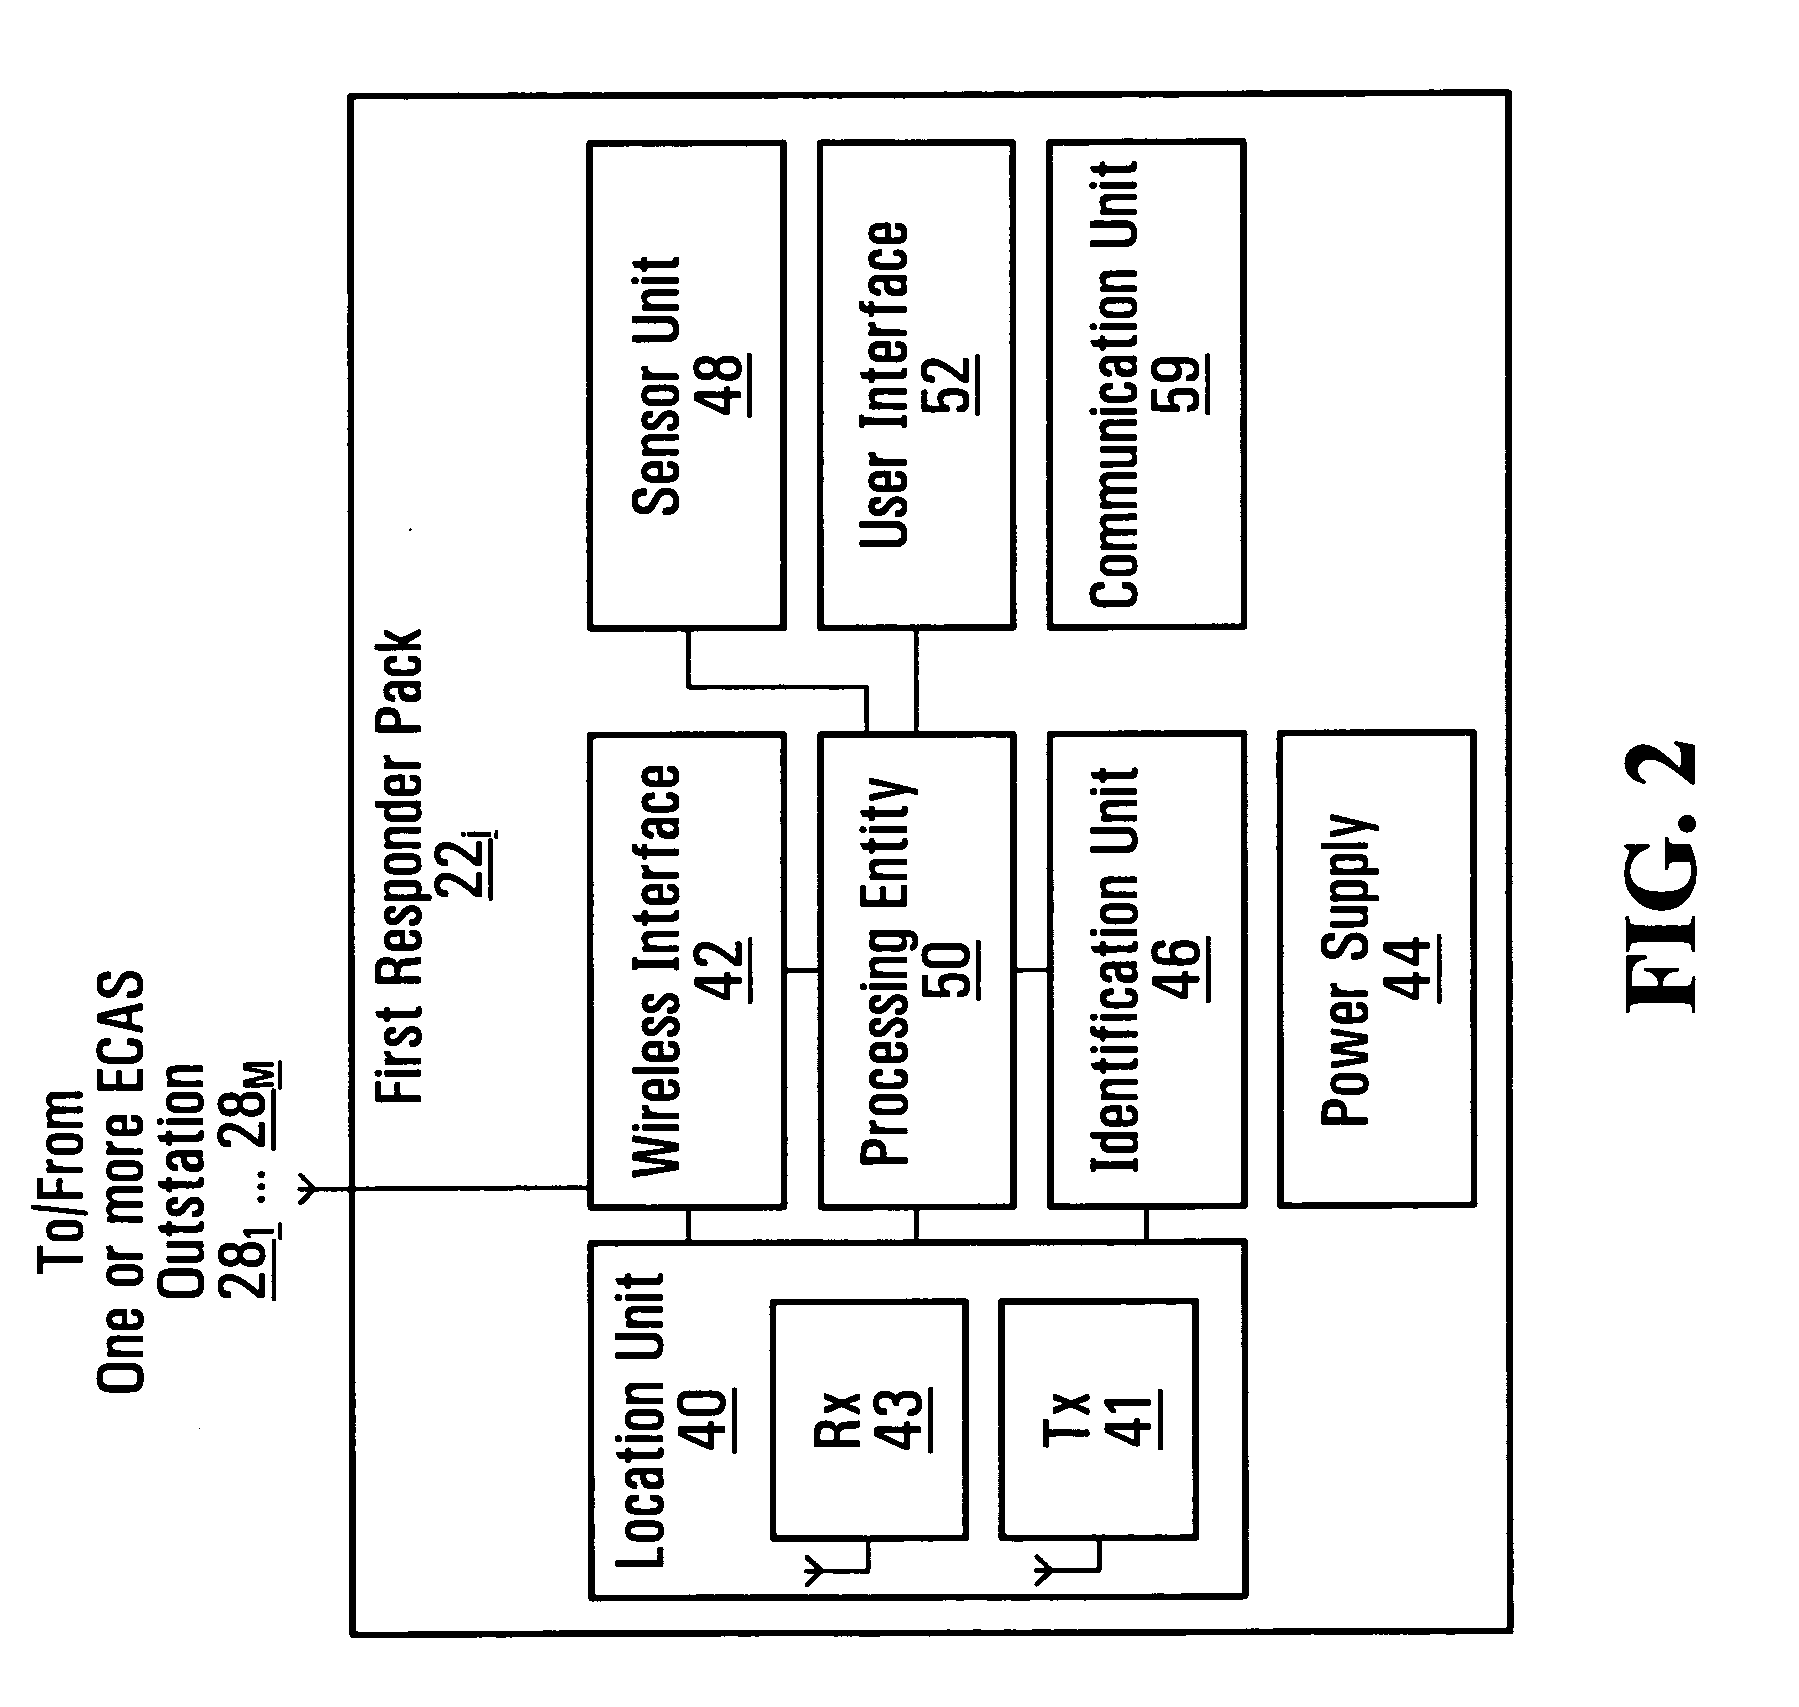 Systems and methods for facilitating a first response mission at an incident scene